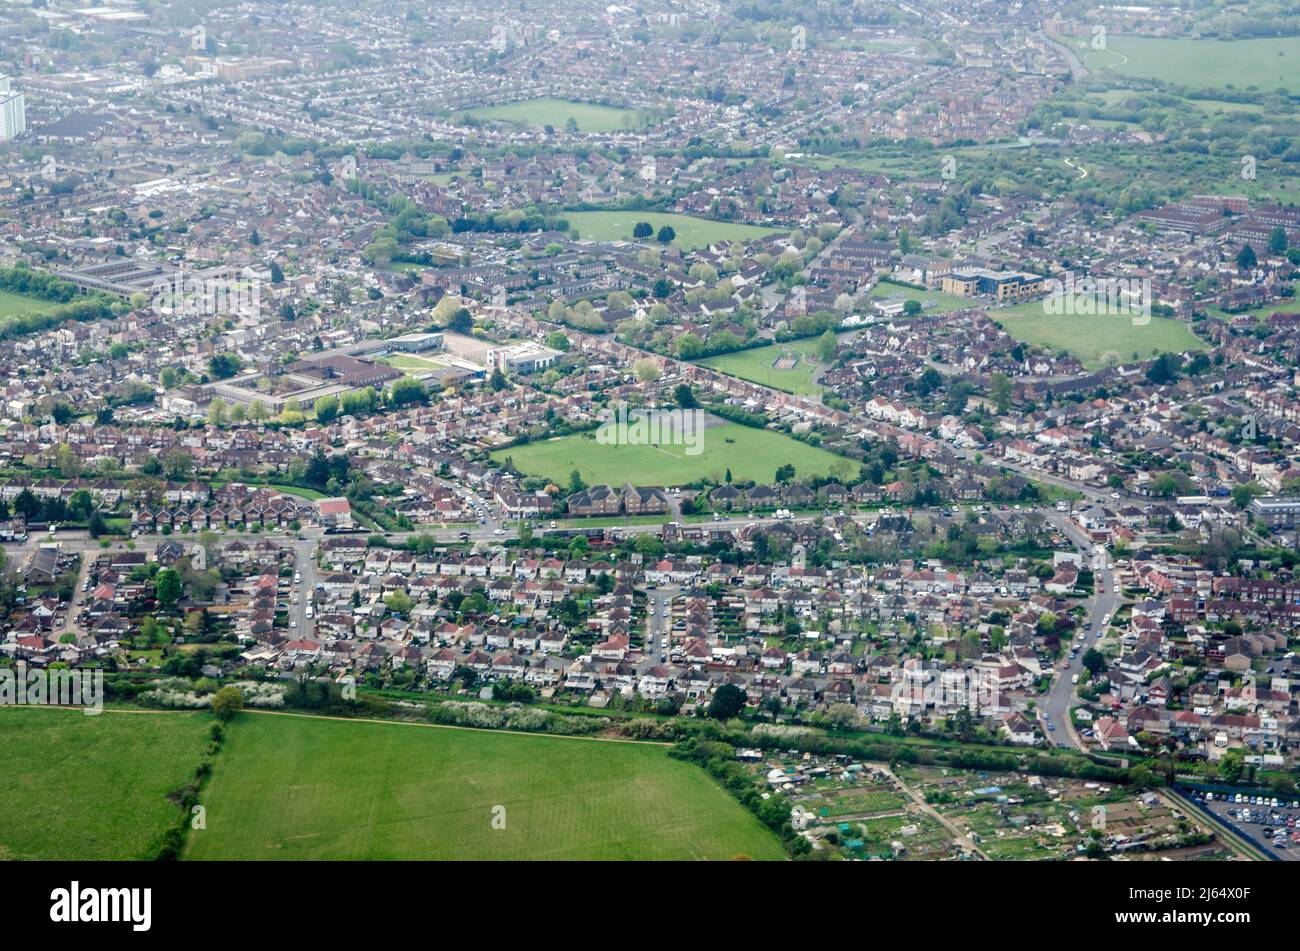 View from above of the London suburb of Feltham.  Towards the centre are the Feltham Arenas Parklands with various sport facilities and towards the le Stock Photo